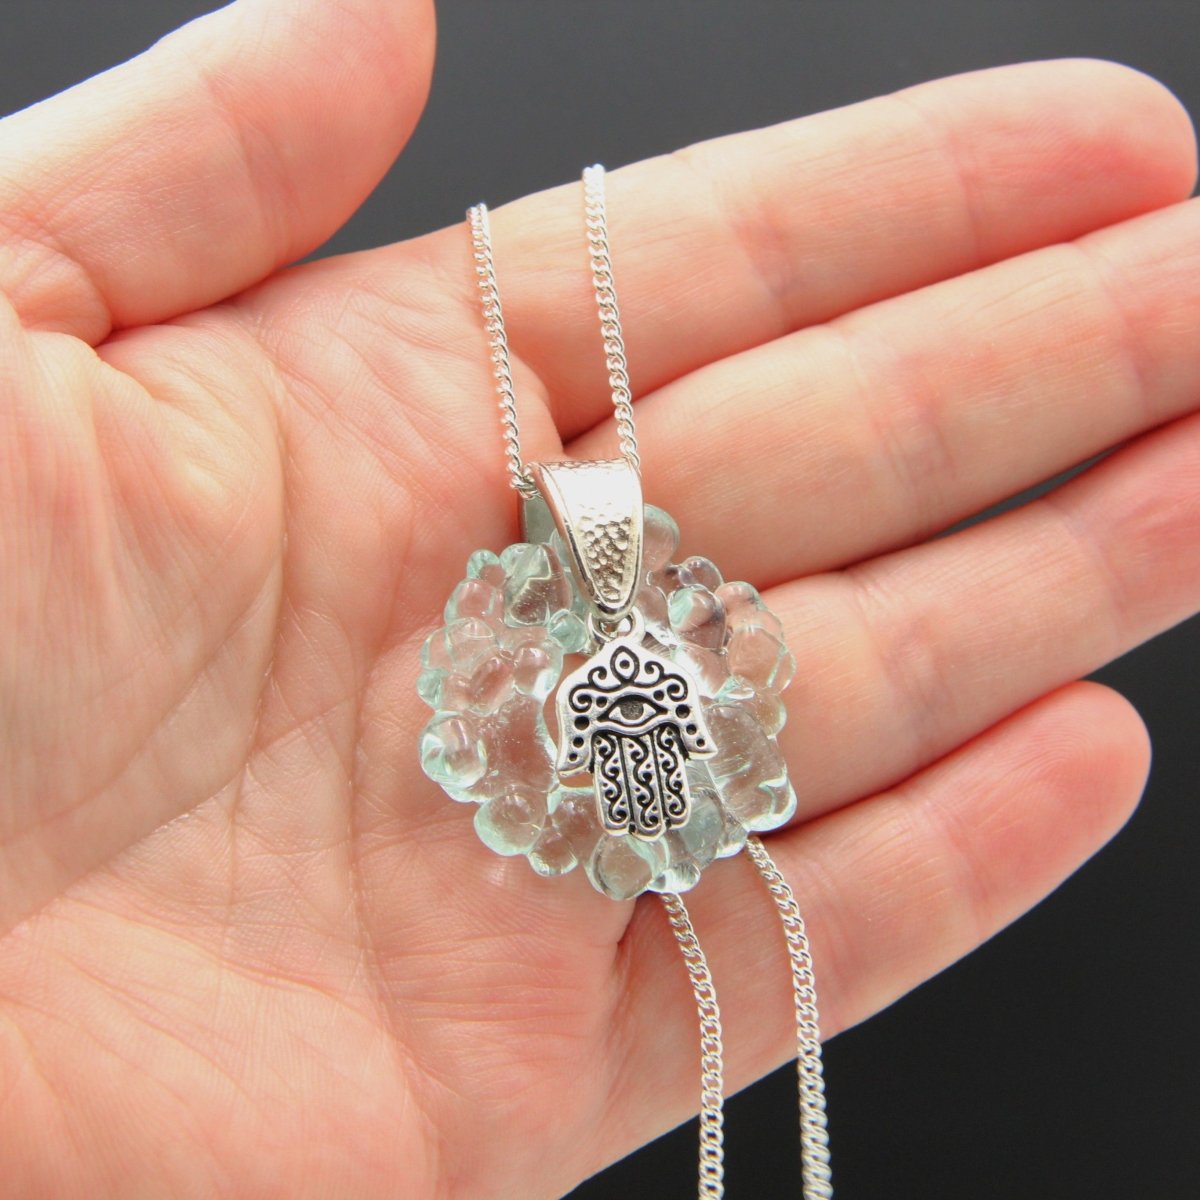 Upcycled Pale Aqua Blue Donut Necklace, Recycled Glass Pendant with Silver Hamsa Hand Charm